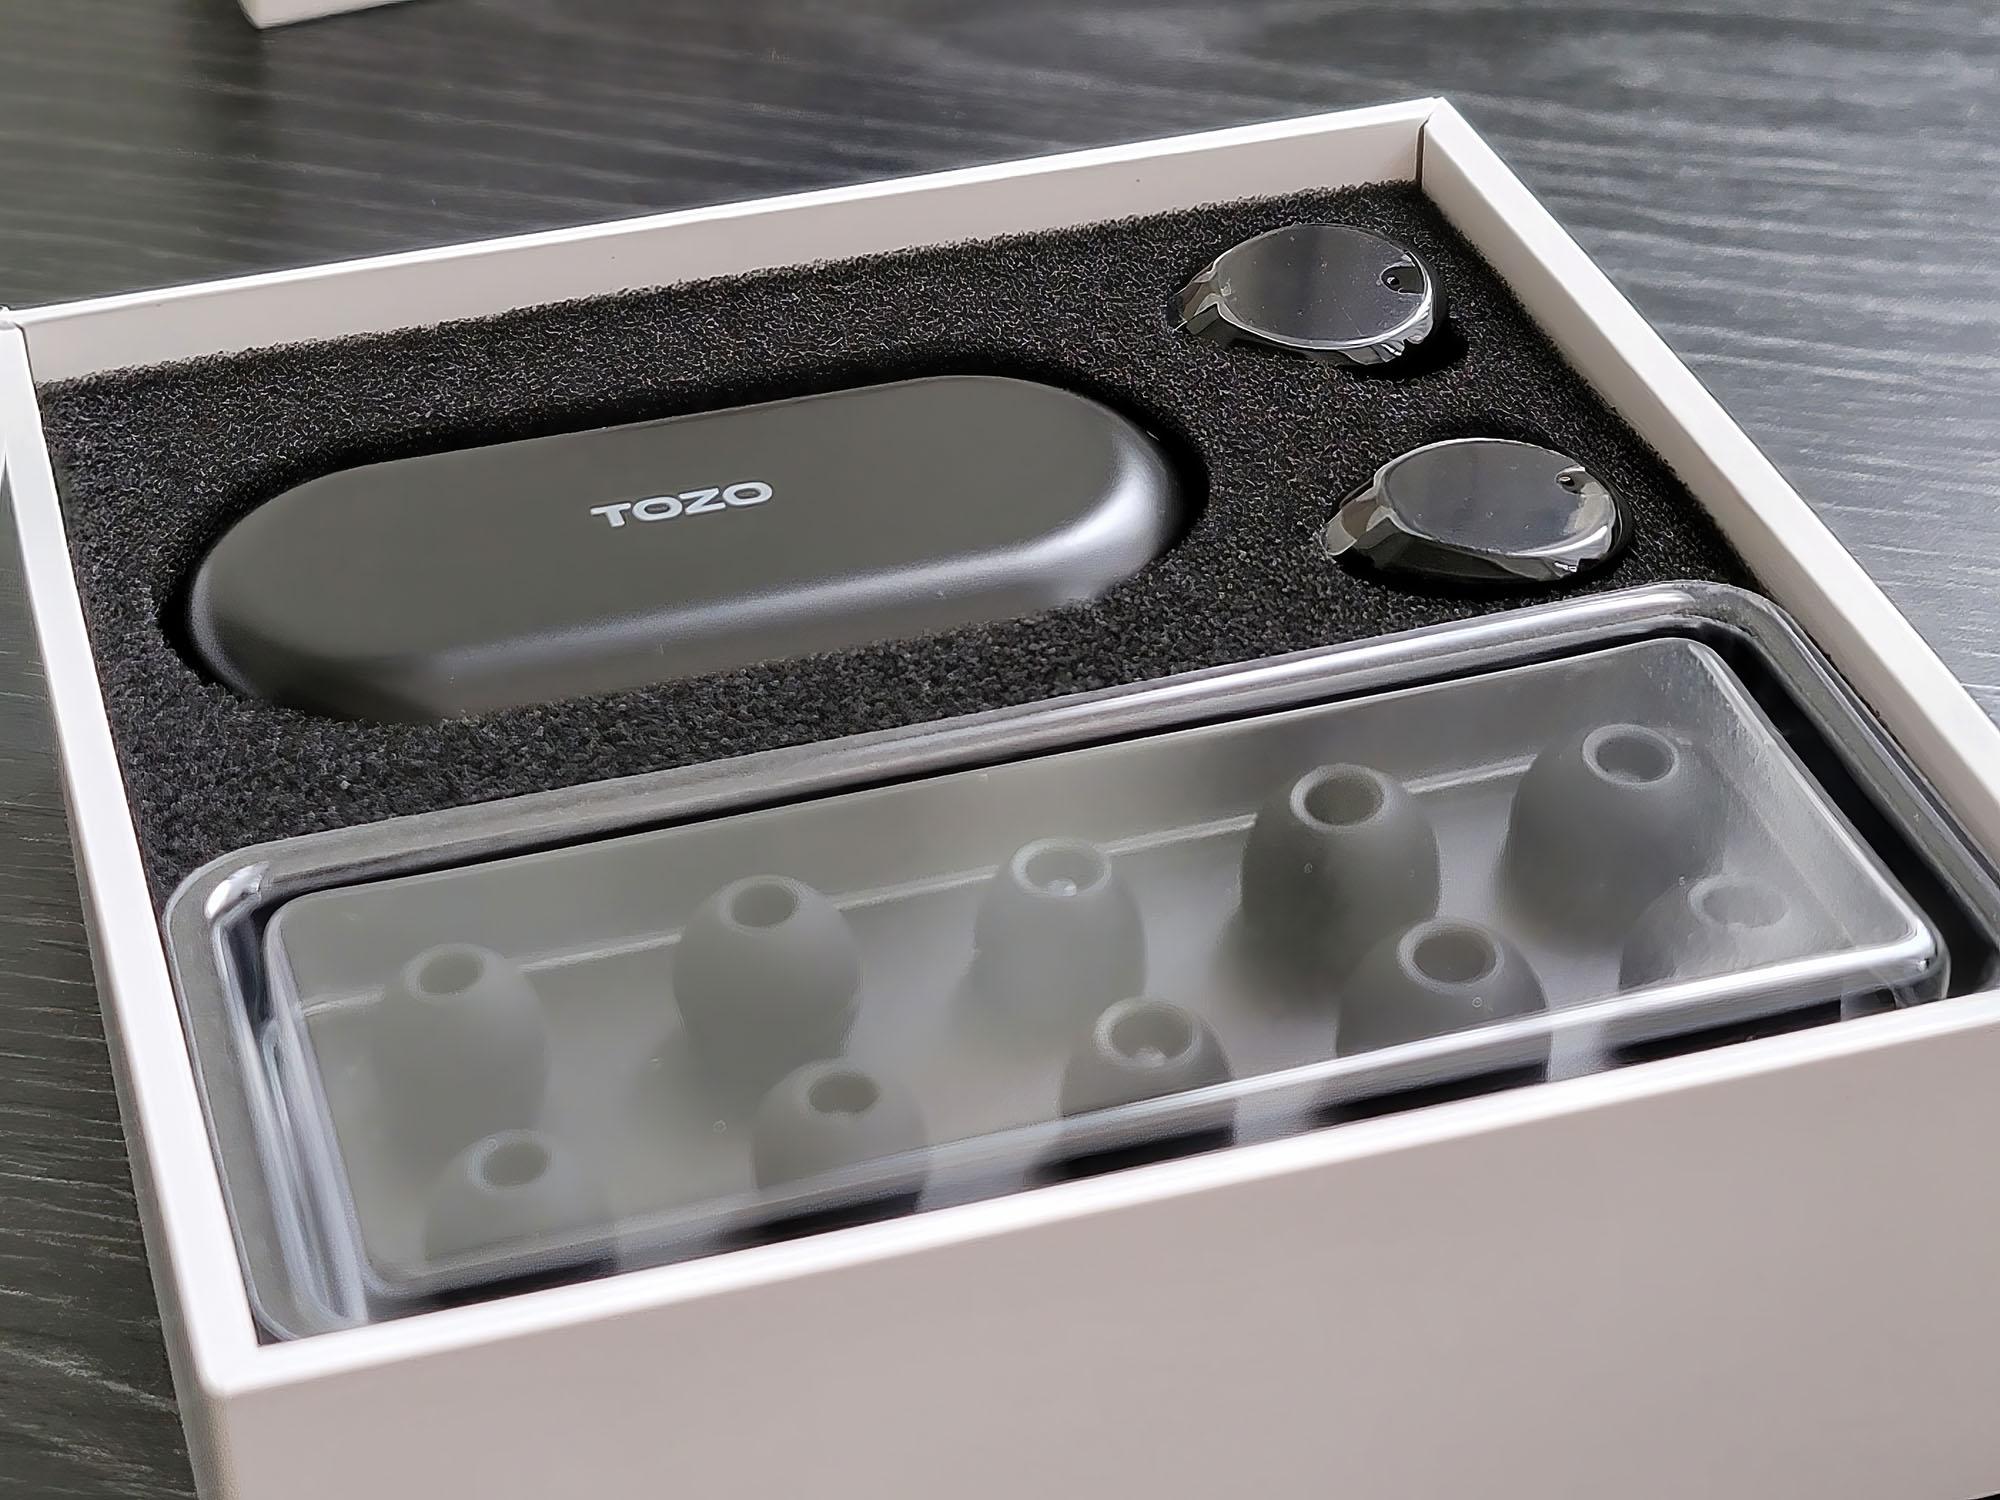 Surprising fidelity makes these a budget pick for good sound on the go 61a95066 tozo t12 packaging